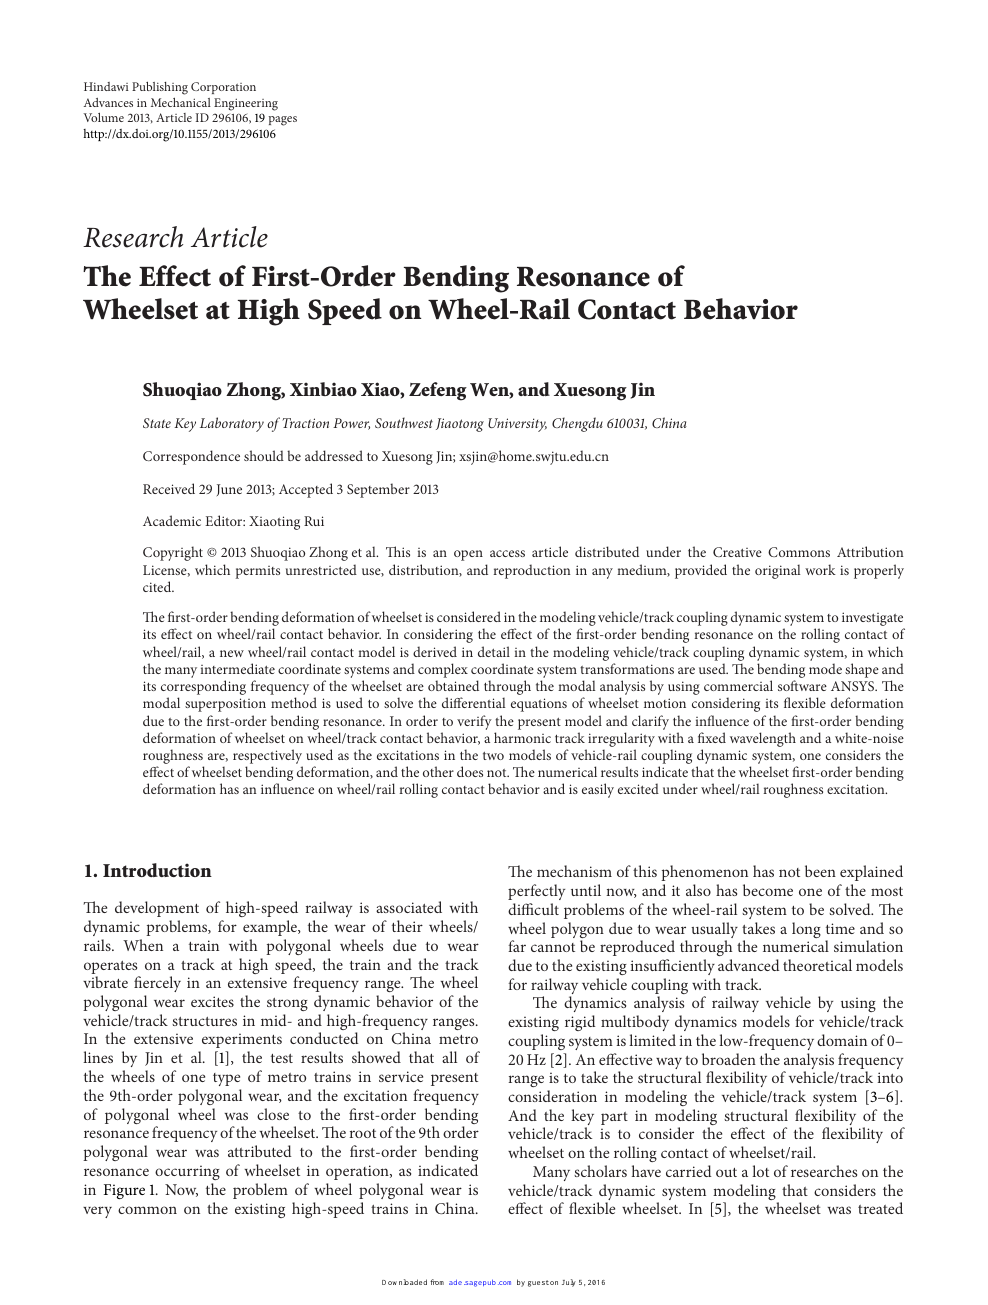 The Effect Of First Order Bending Resonance Of Wheelset At High Speed On Wheel Rail Contact Behavior Topic Of Research Paper In Mechanical Engineering Download Scholarly Article Pdf And Read For Free On